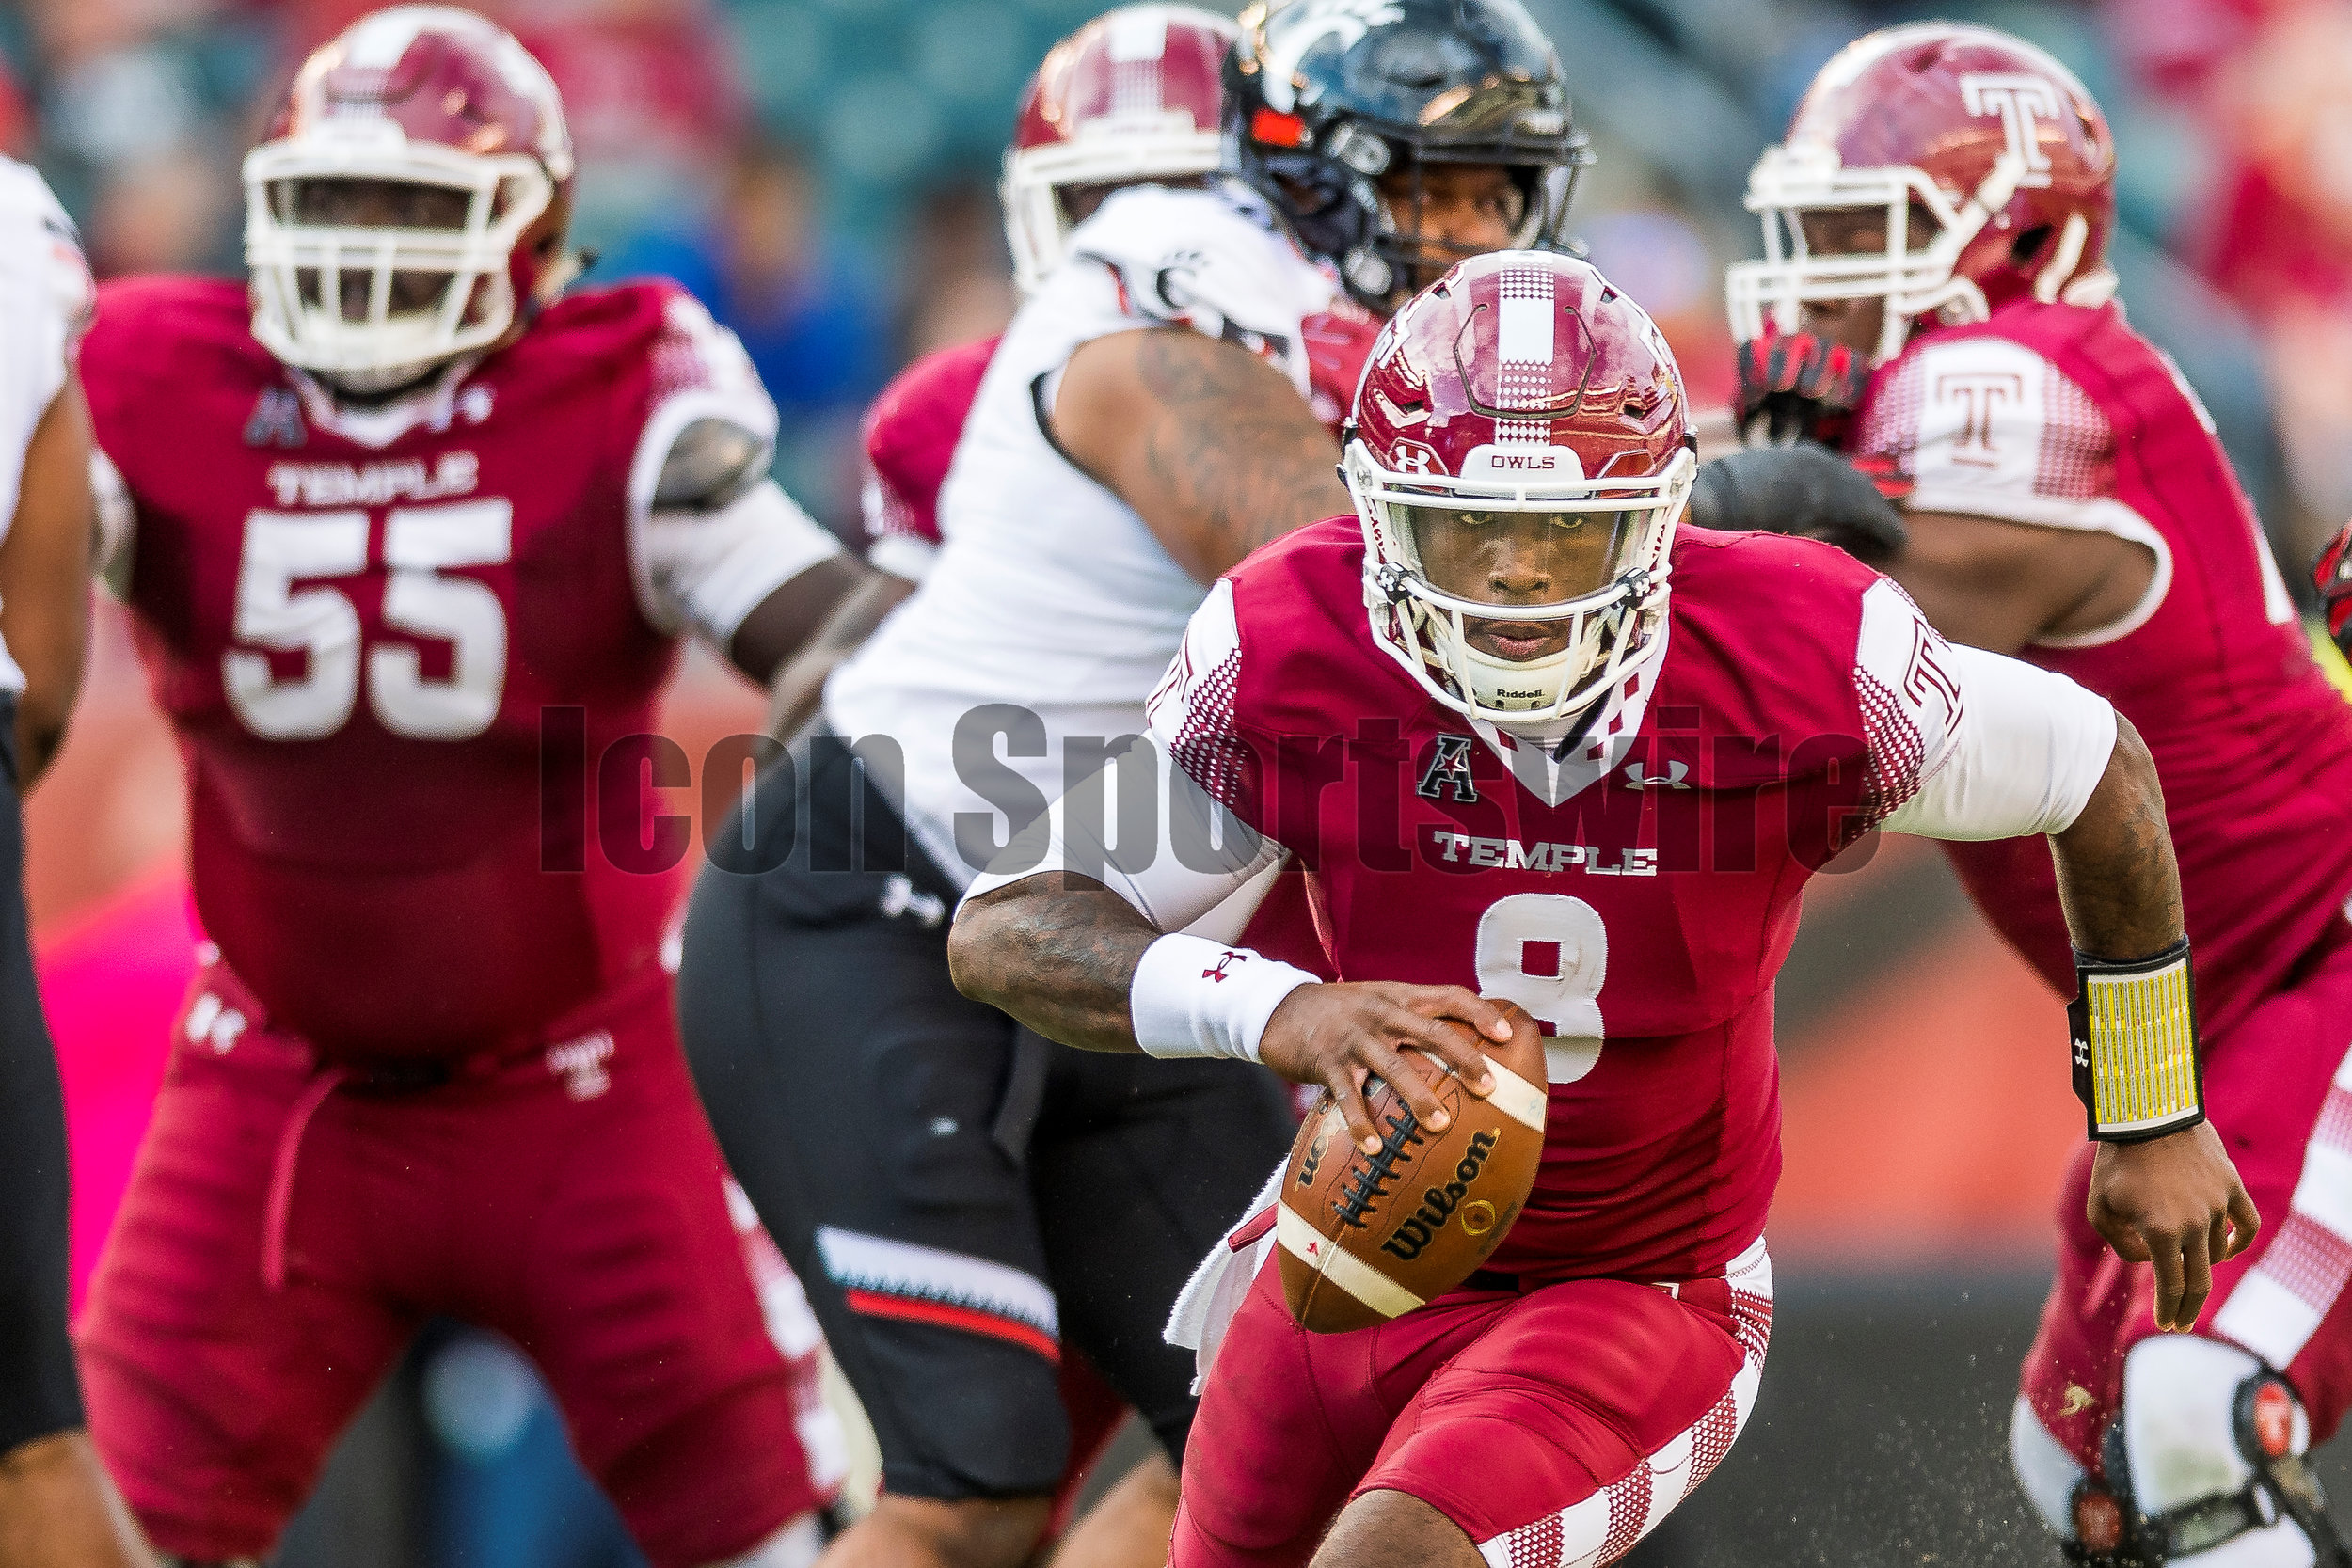  PHILADELPHIA, PA - OCTOBER 29: Temple Owls quarterback Phillip Walker (8) drives up the middle on his own during the game between the Cincinnati Bearcats and the Temple Owls on October 29, 2016, at Lincoln Financial Field in Philadelphia, PA. (Photo